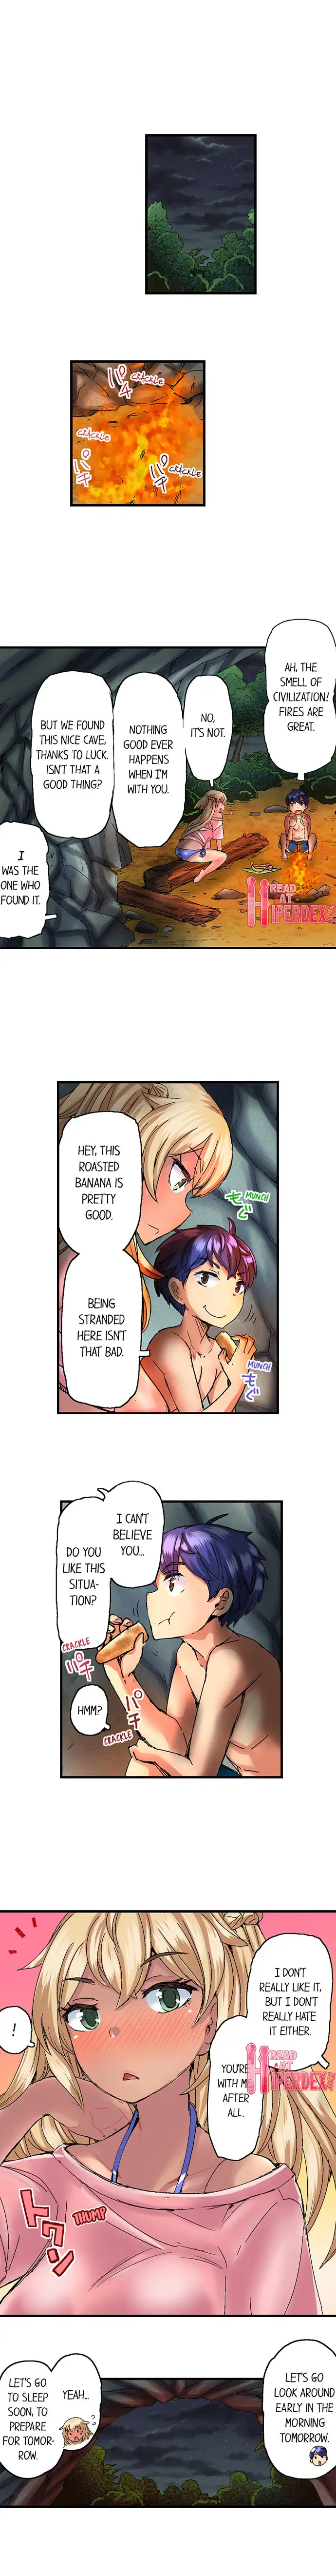 Taking a Hot Tanned Chick’s Virginity - Chapter 10 Page 5